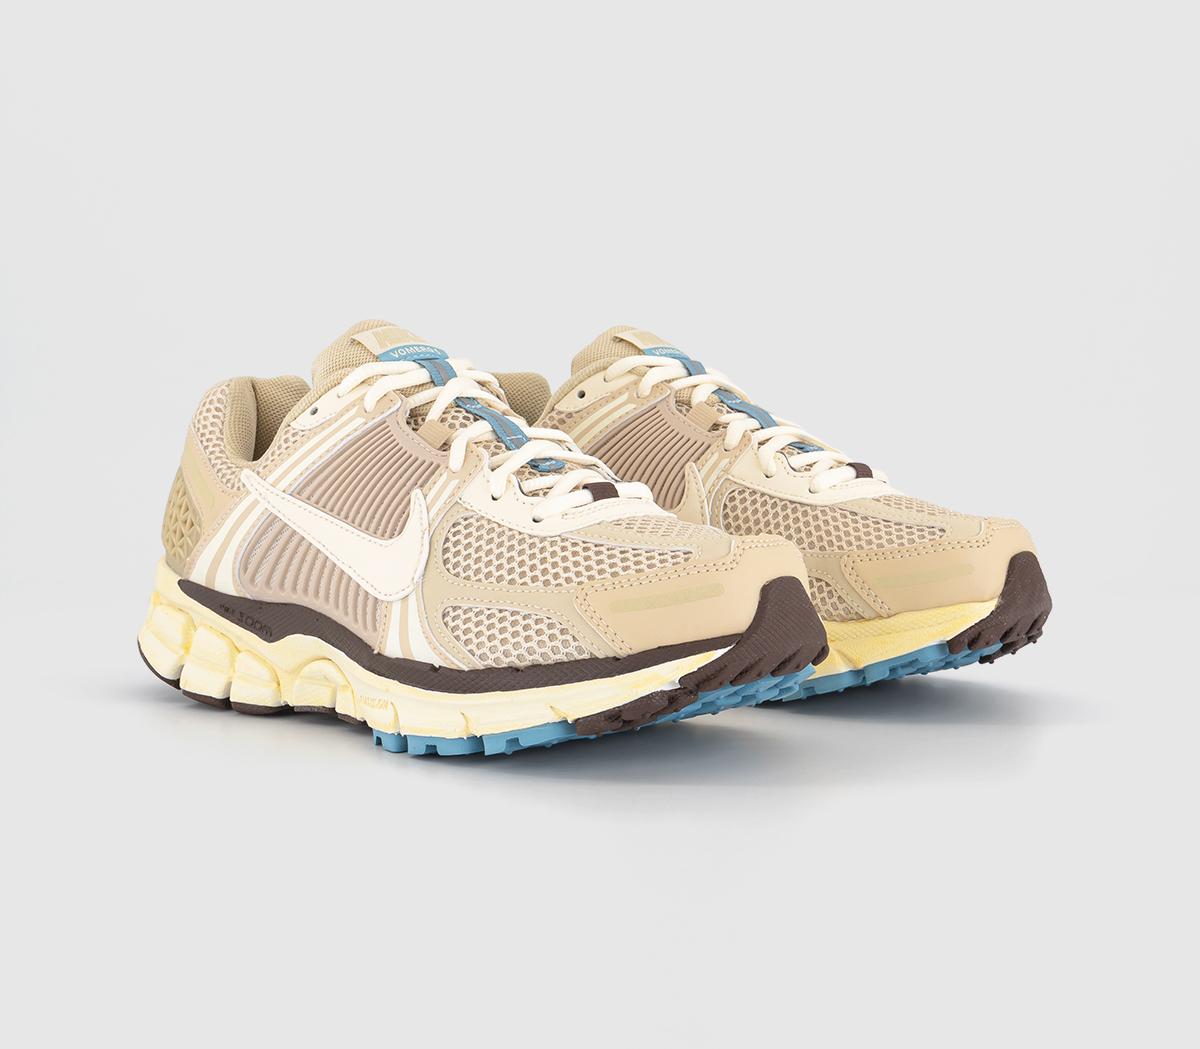 Nike Womens Zoom Vomero 5 Trainers Oatmeal Pale Ivory Sail Light Chocolate Worn Blue Natural, 8.5